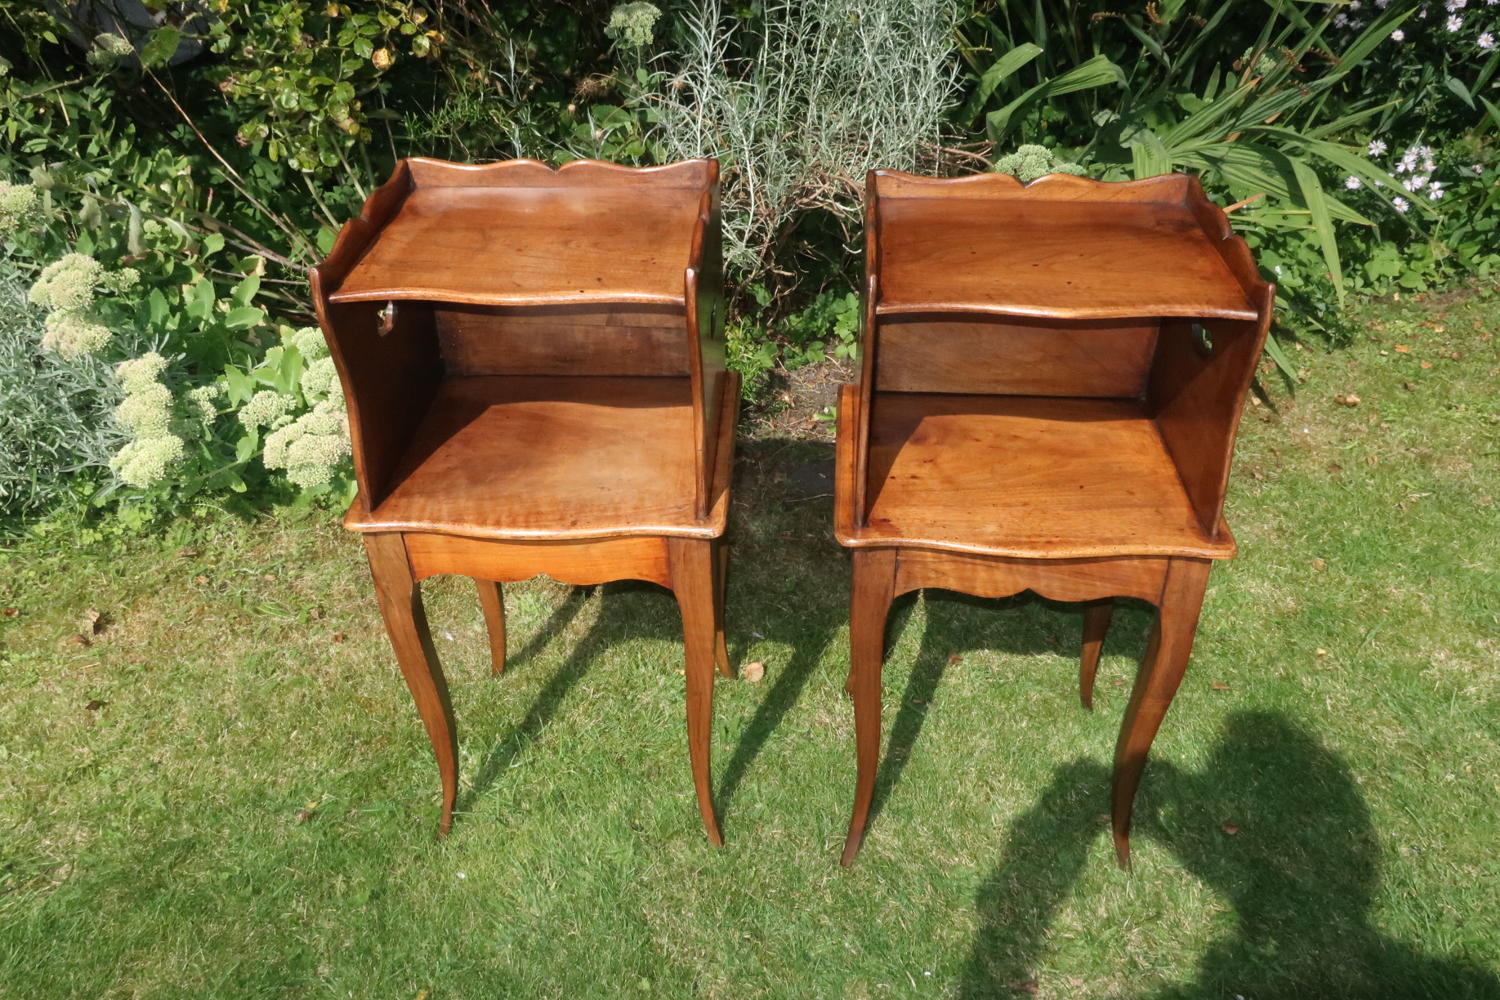 Pair of walnut bedside tables